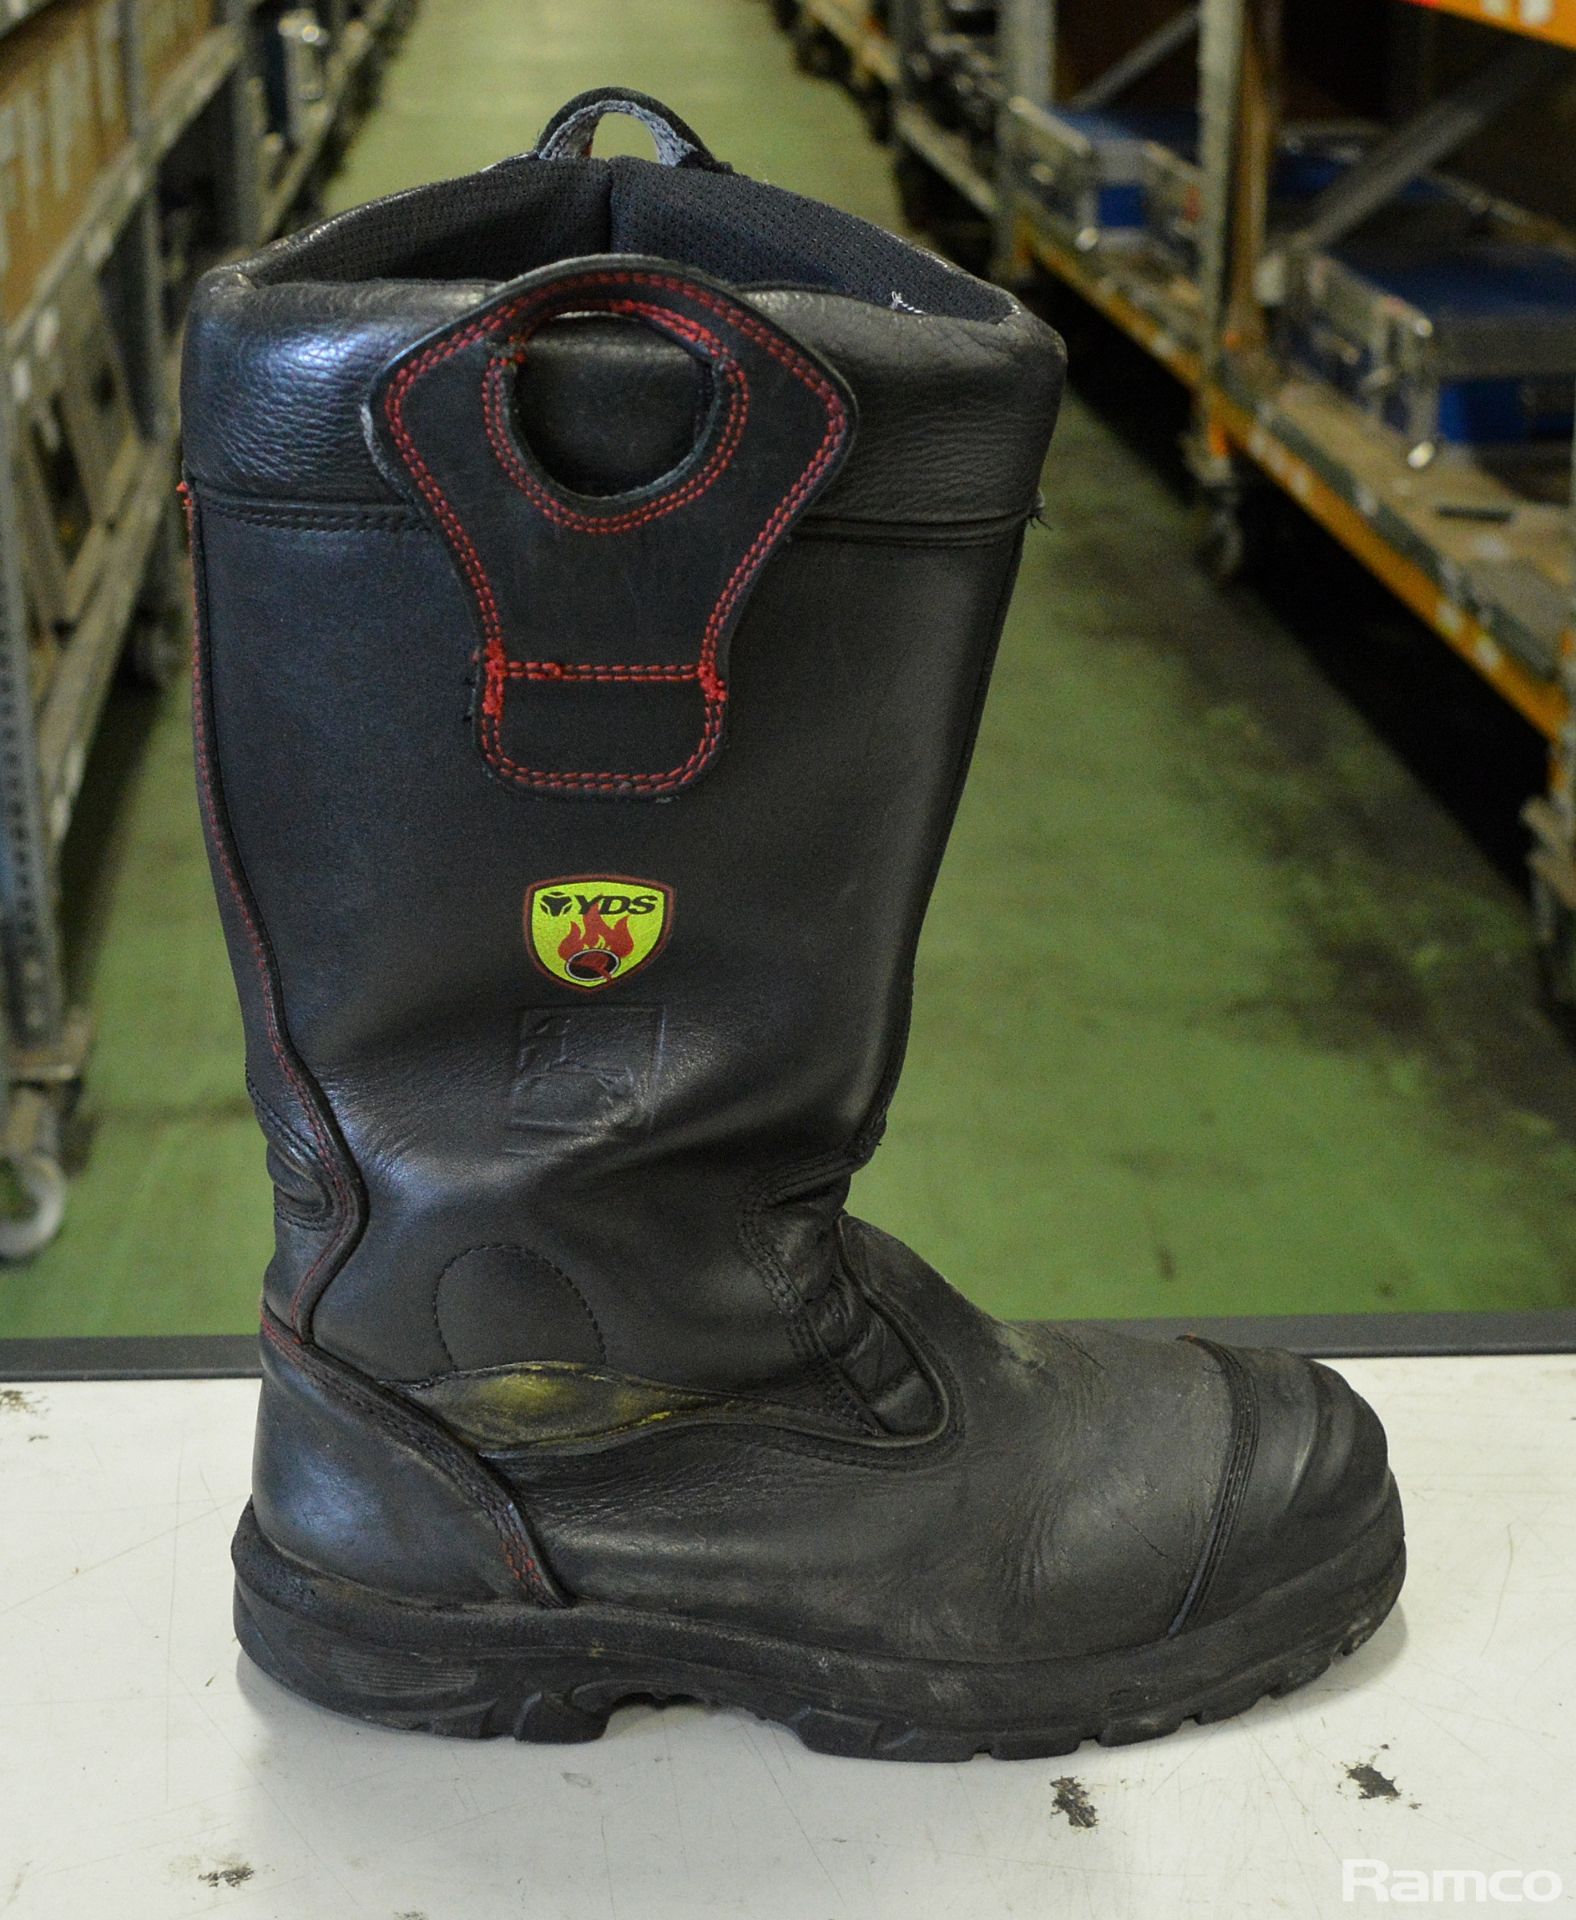 Crosstech YDS - used fire fighter boots - size 7 - Image 2 of 3